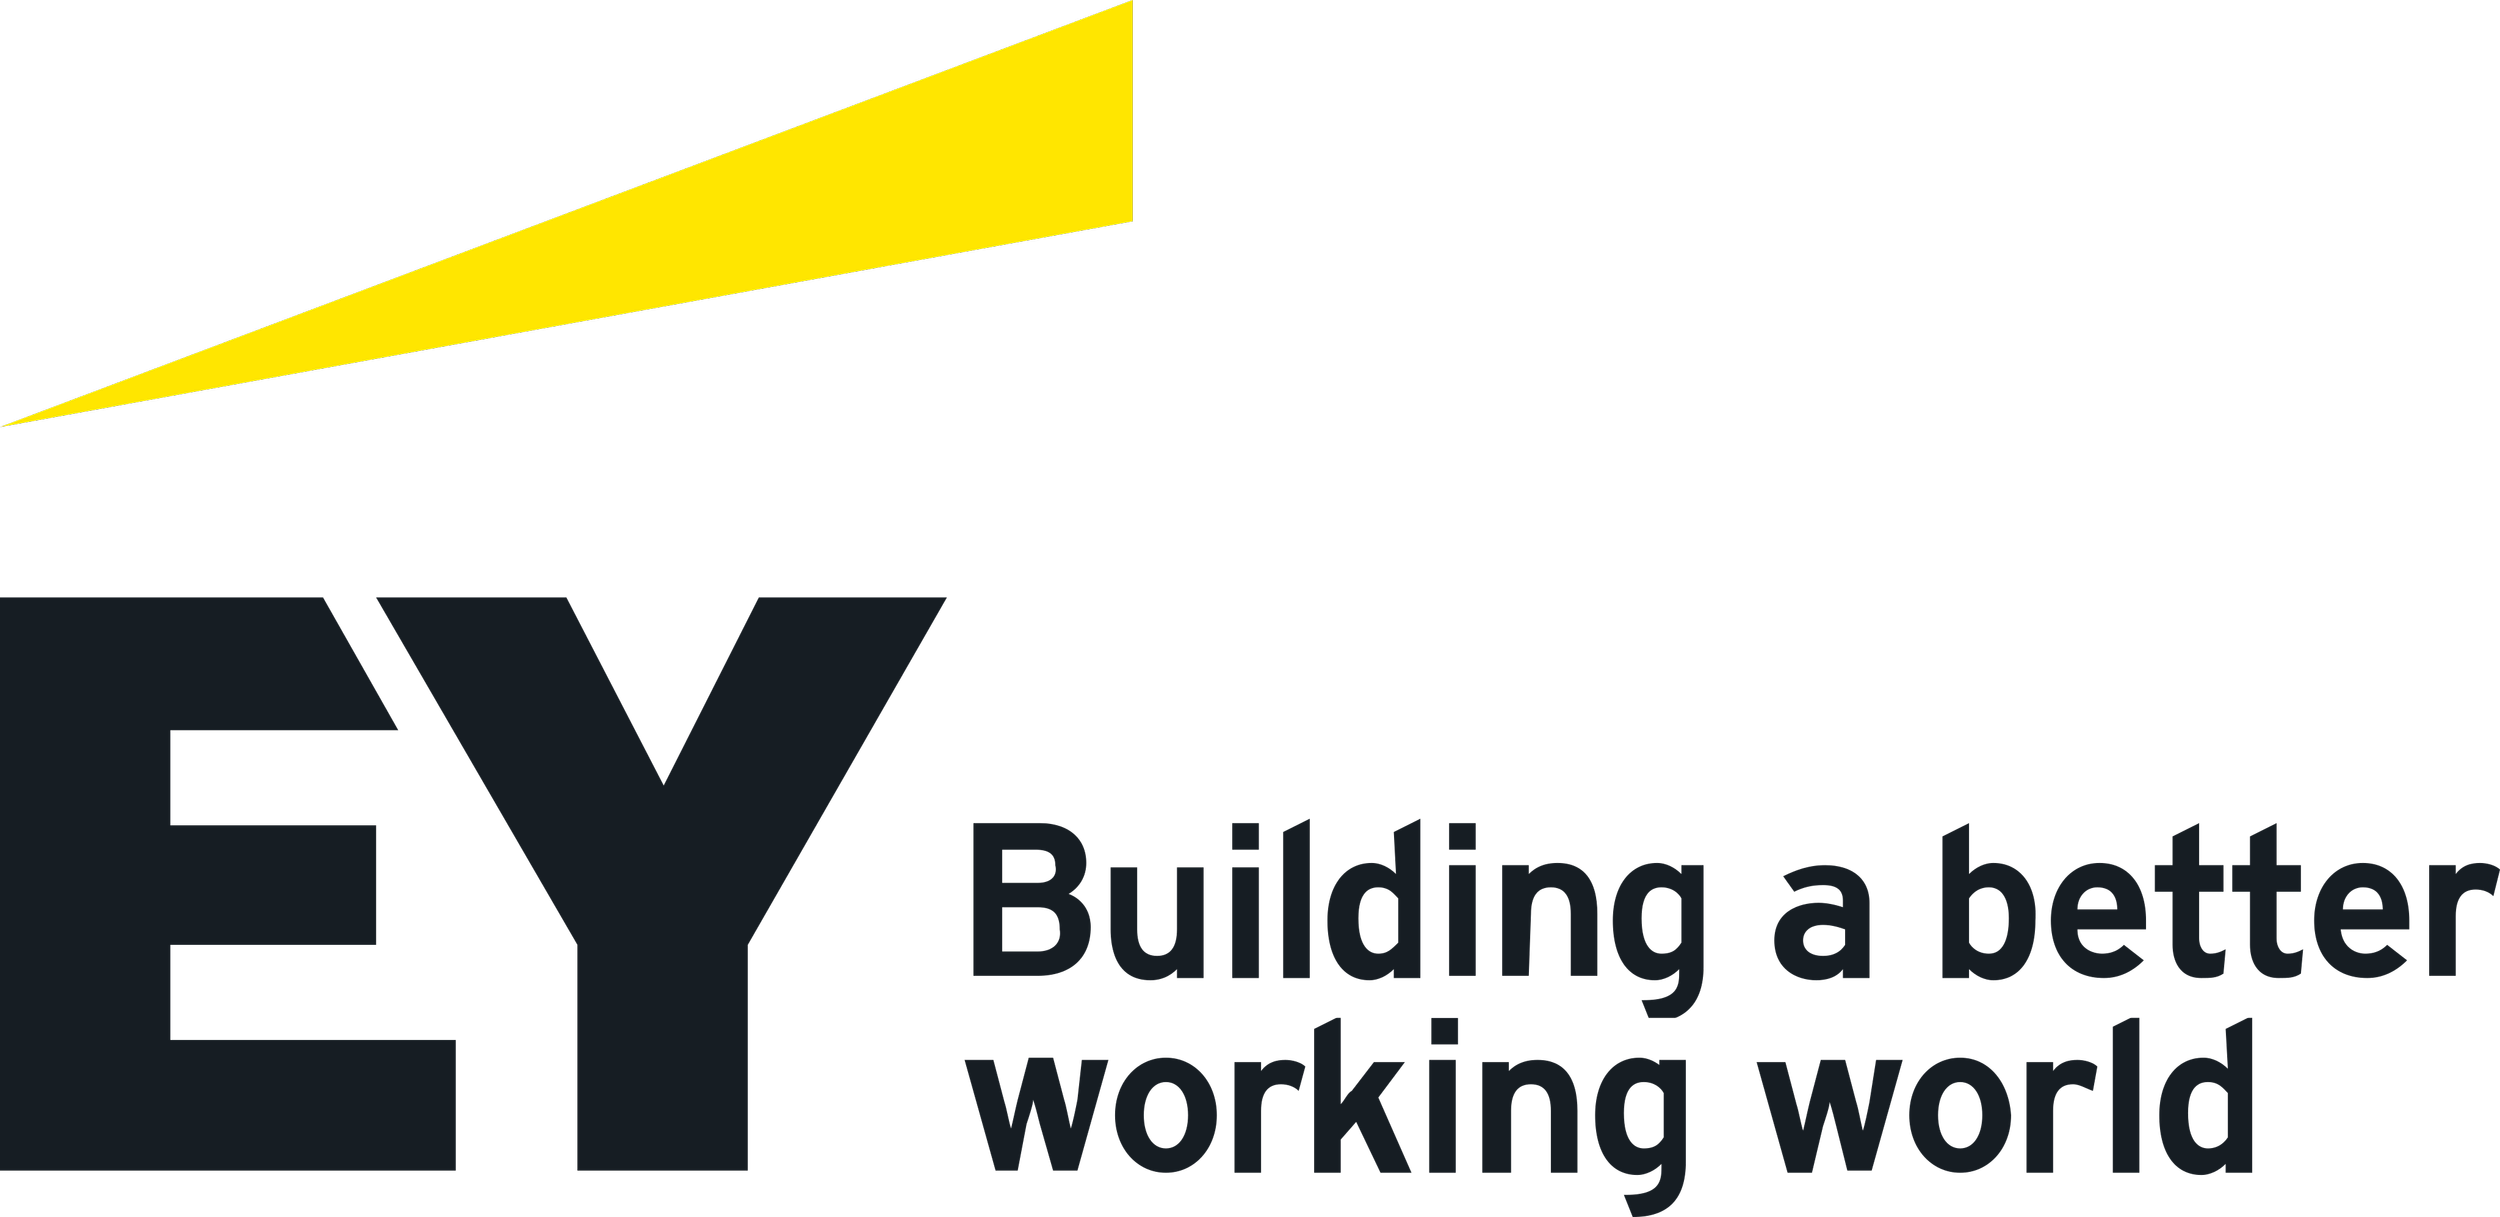 ernst-young-logo.png